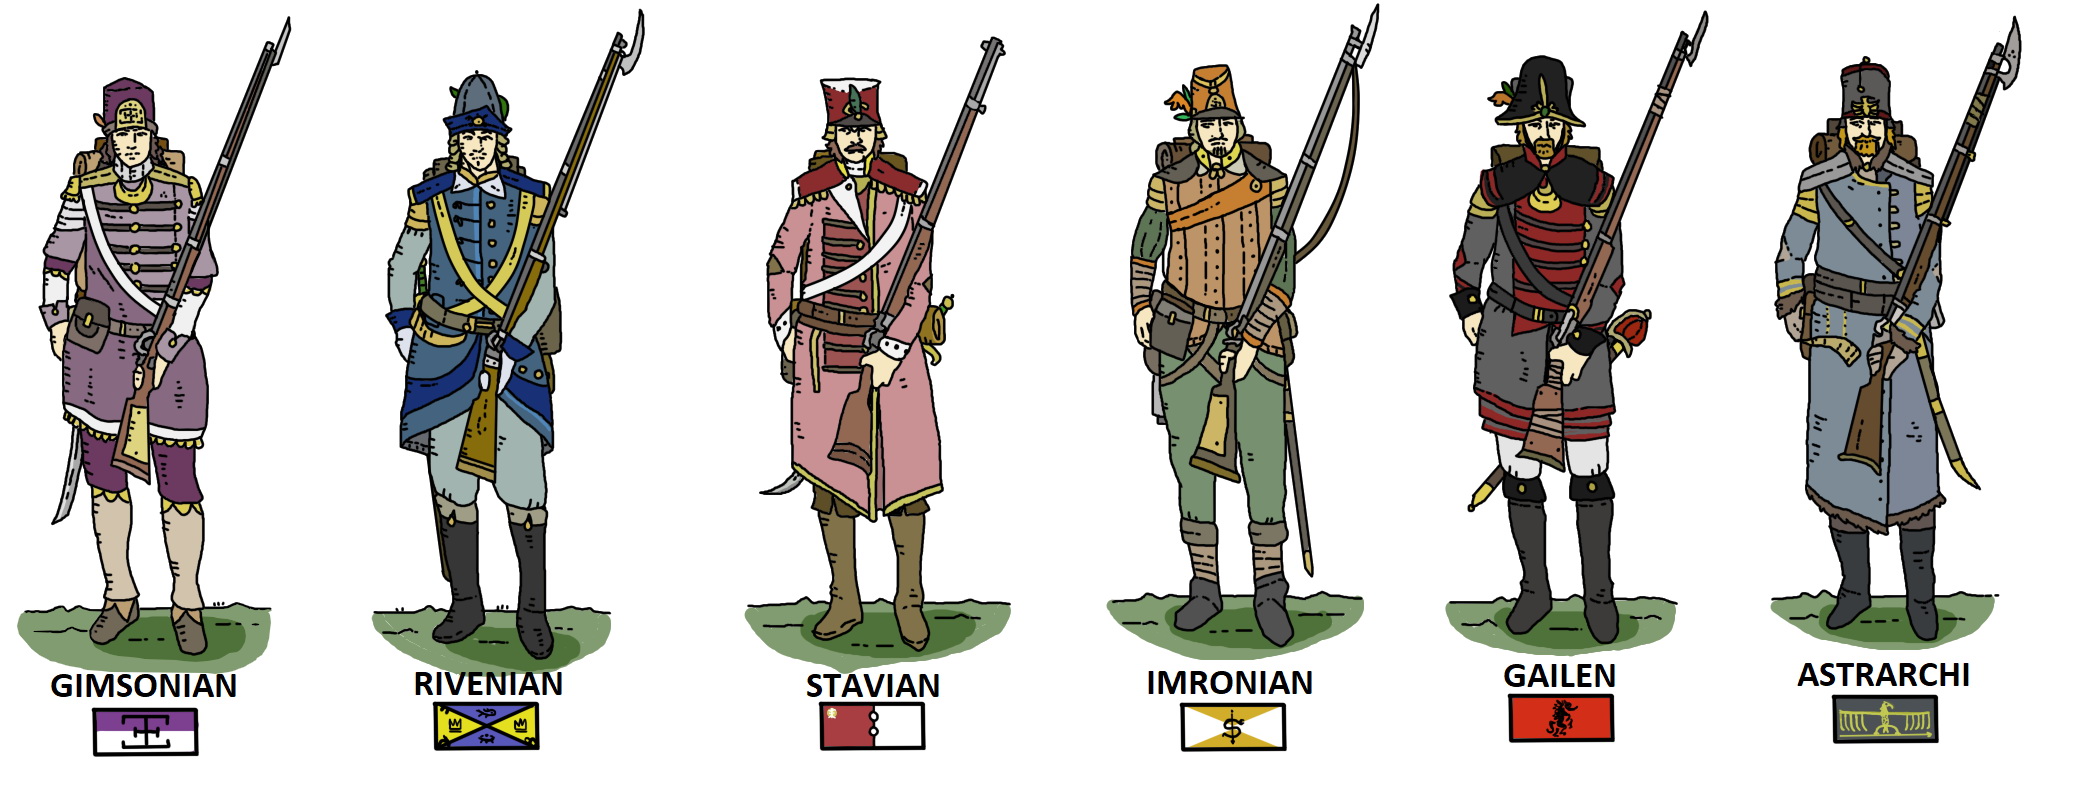 28th Age contemporary regimental Aphalian infantry units by Centinuus.jpg